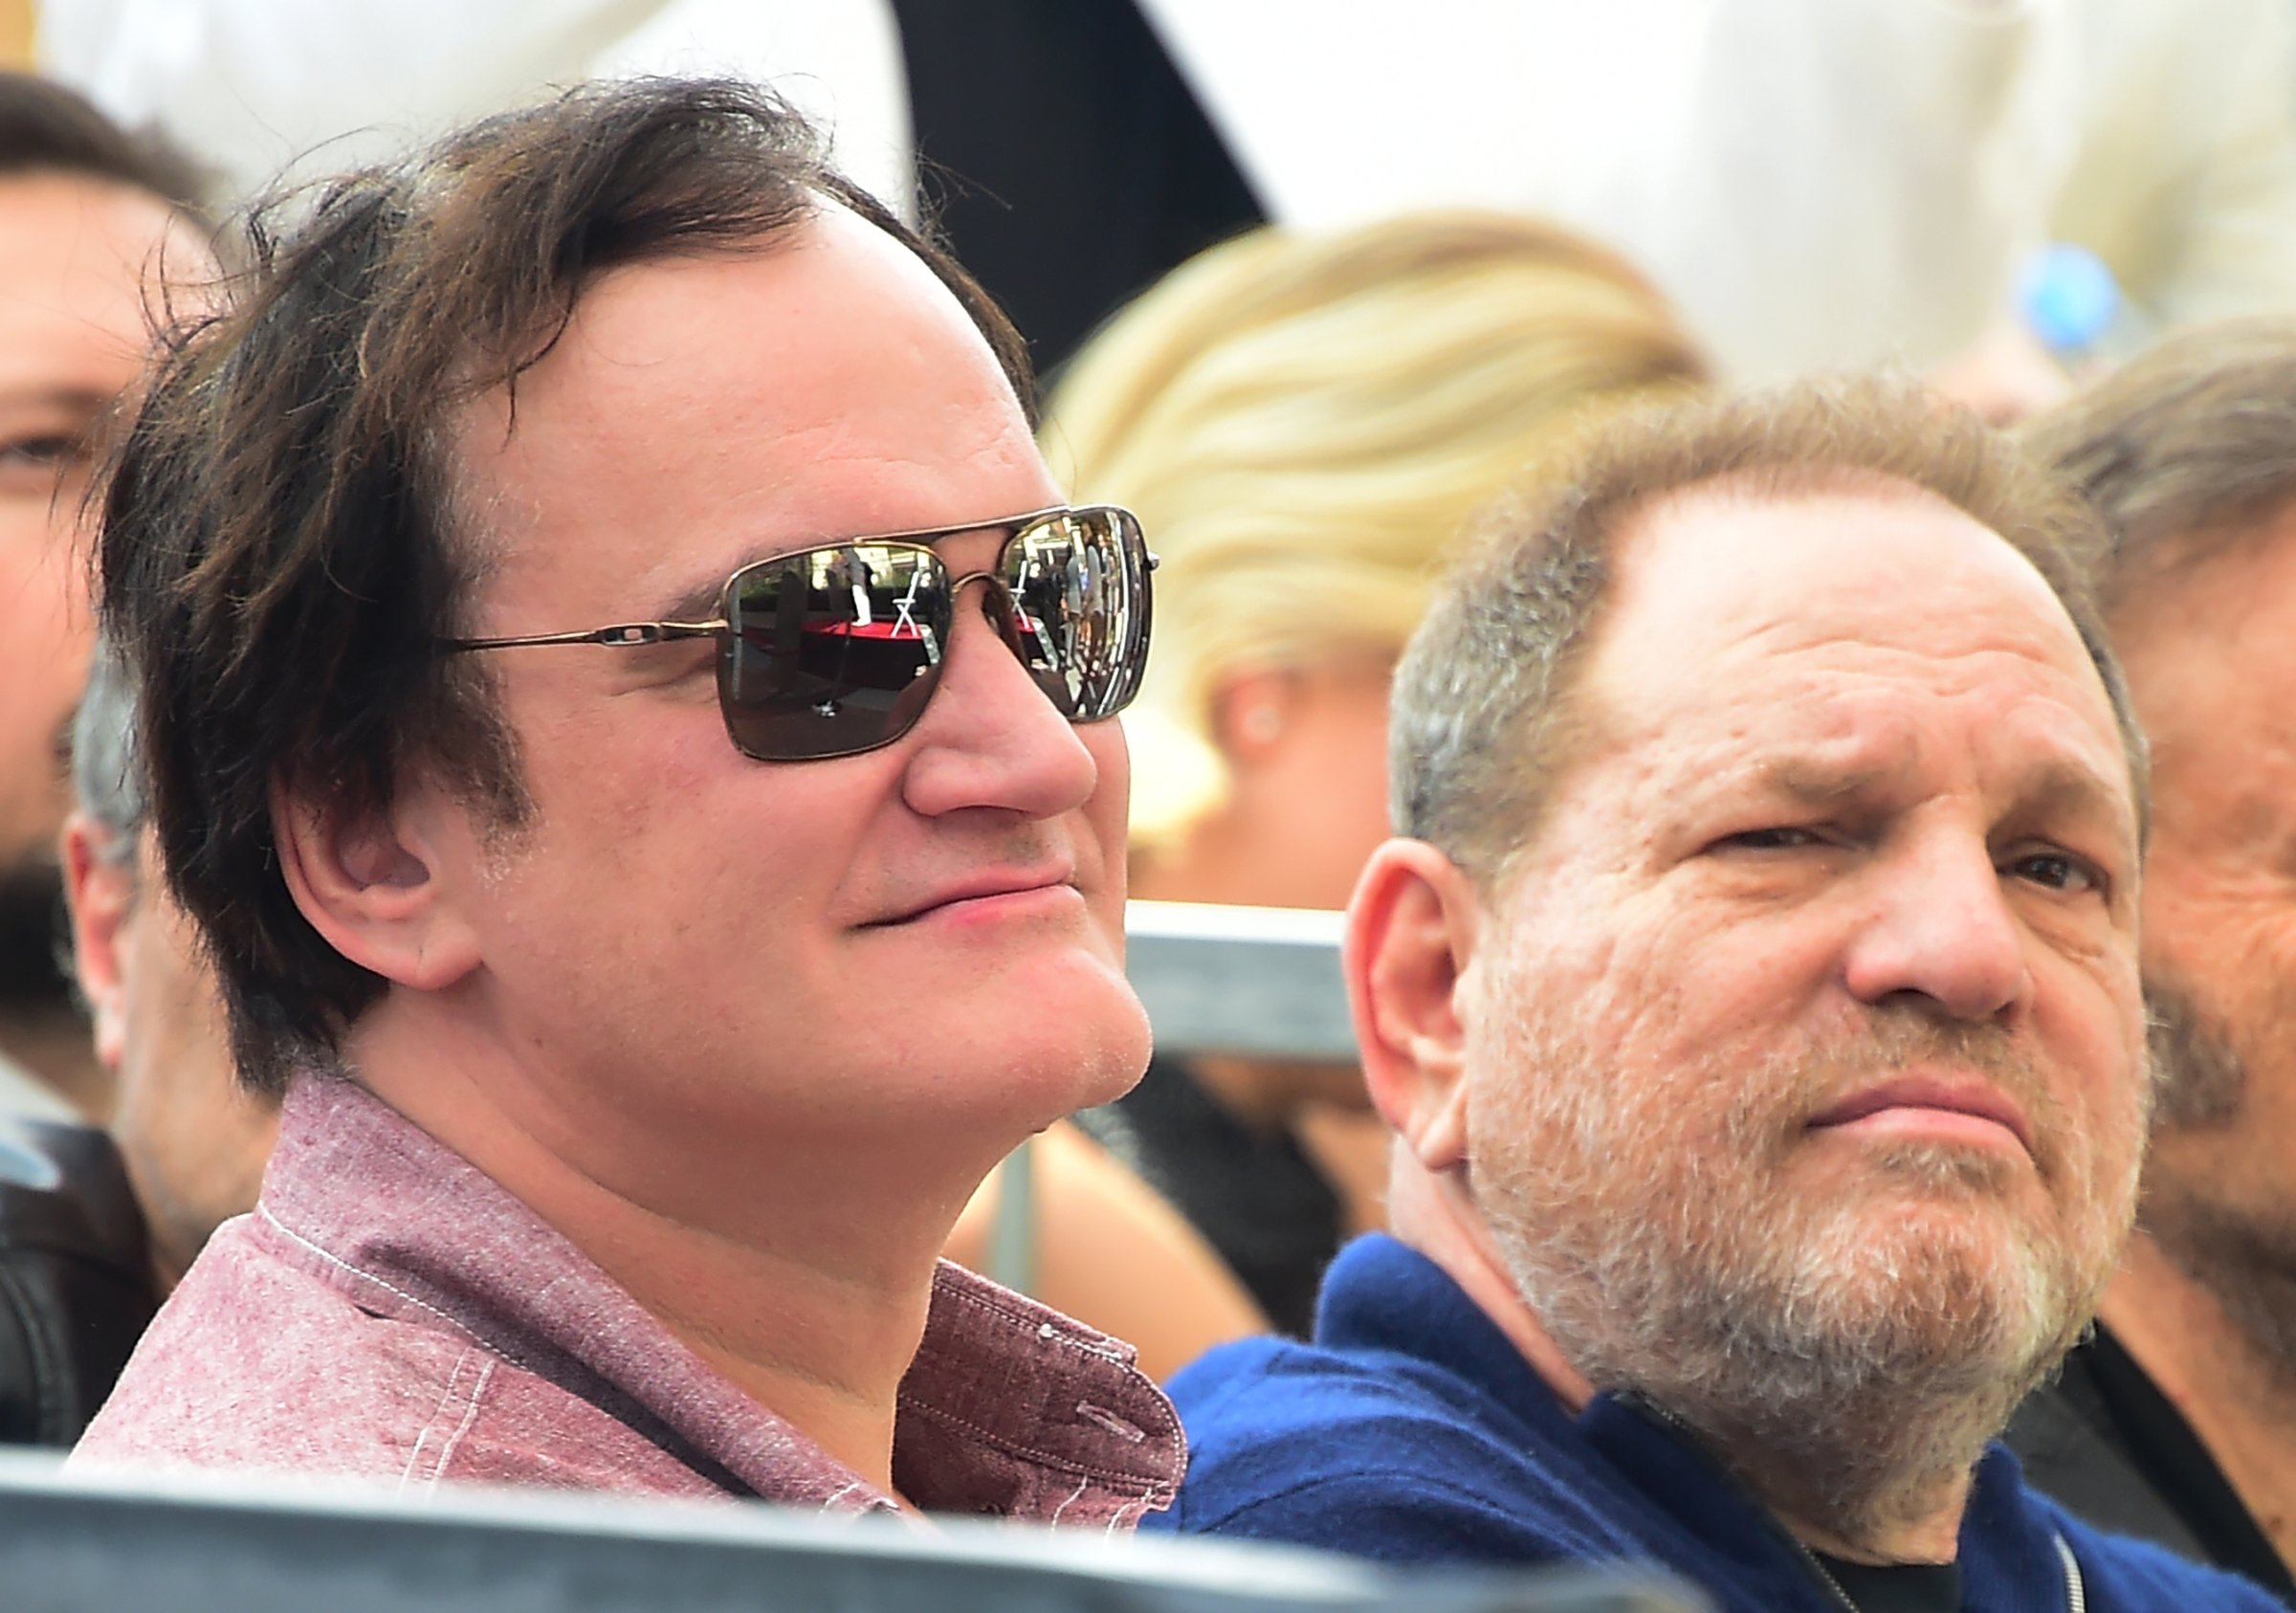 Film director Quentin Tarantino and producer Harvey Weinstein attend Italian composer Ennio Morricone's Hollywood Walk of Fame Star ceremony on Feb. 26, 2016 in Hollywood.